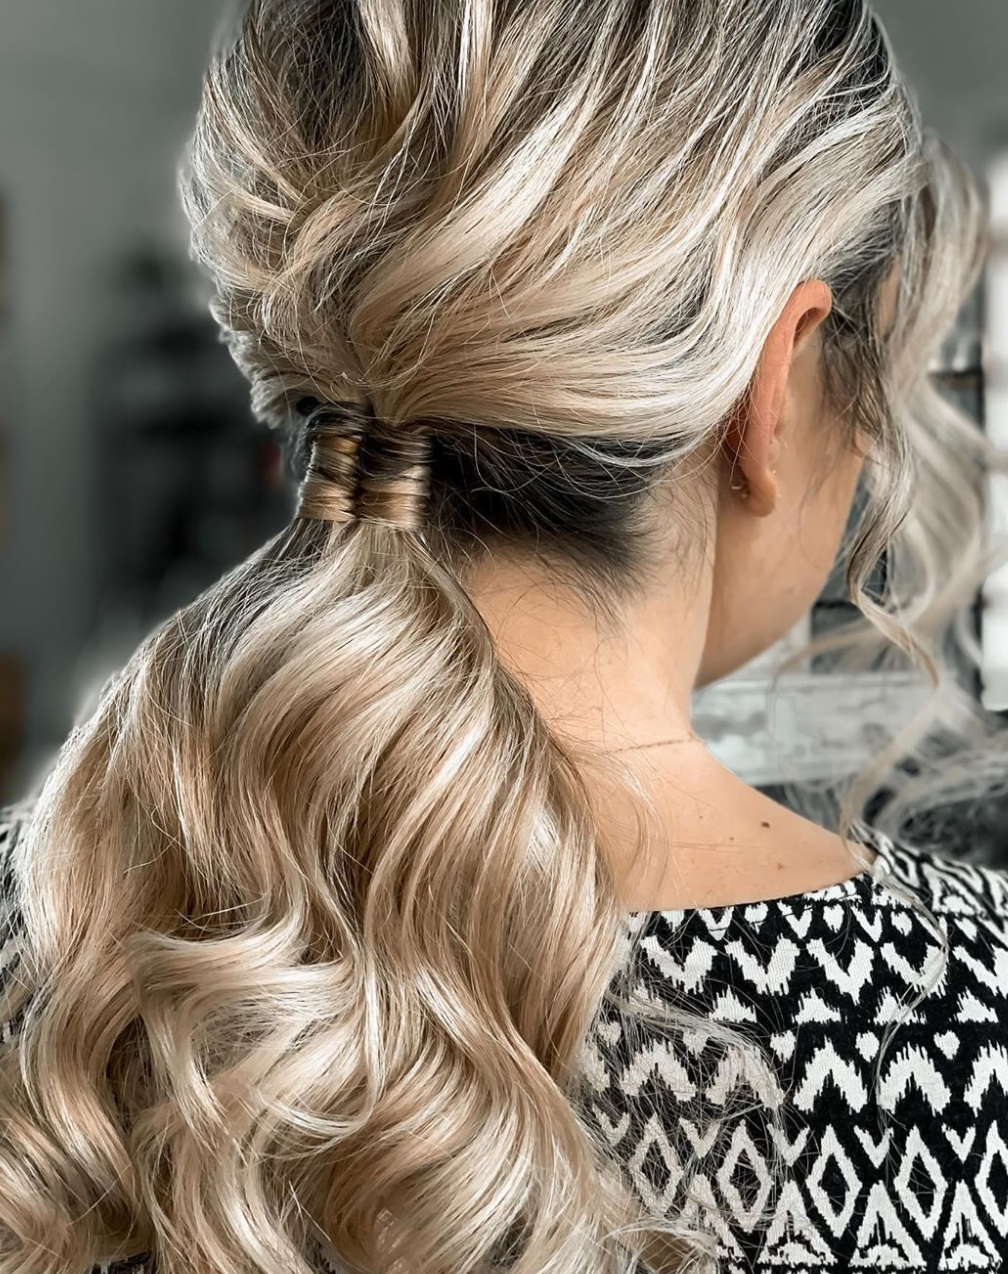 Pin on hairstyle